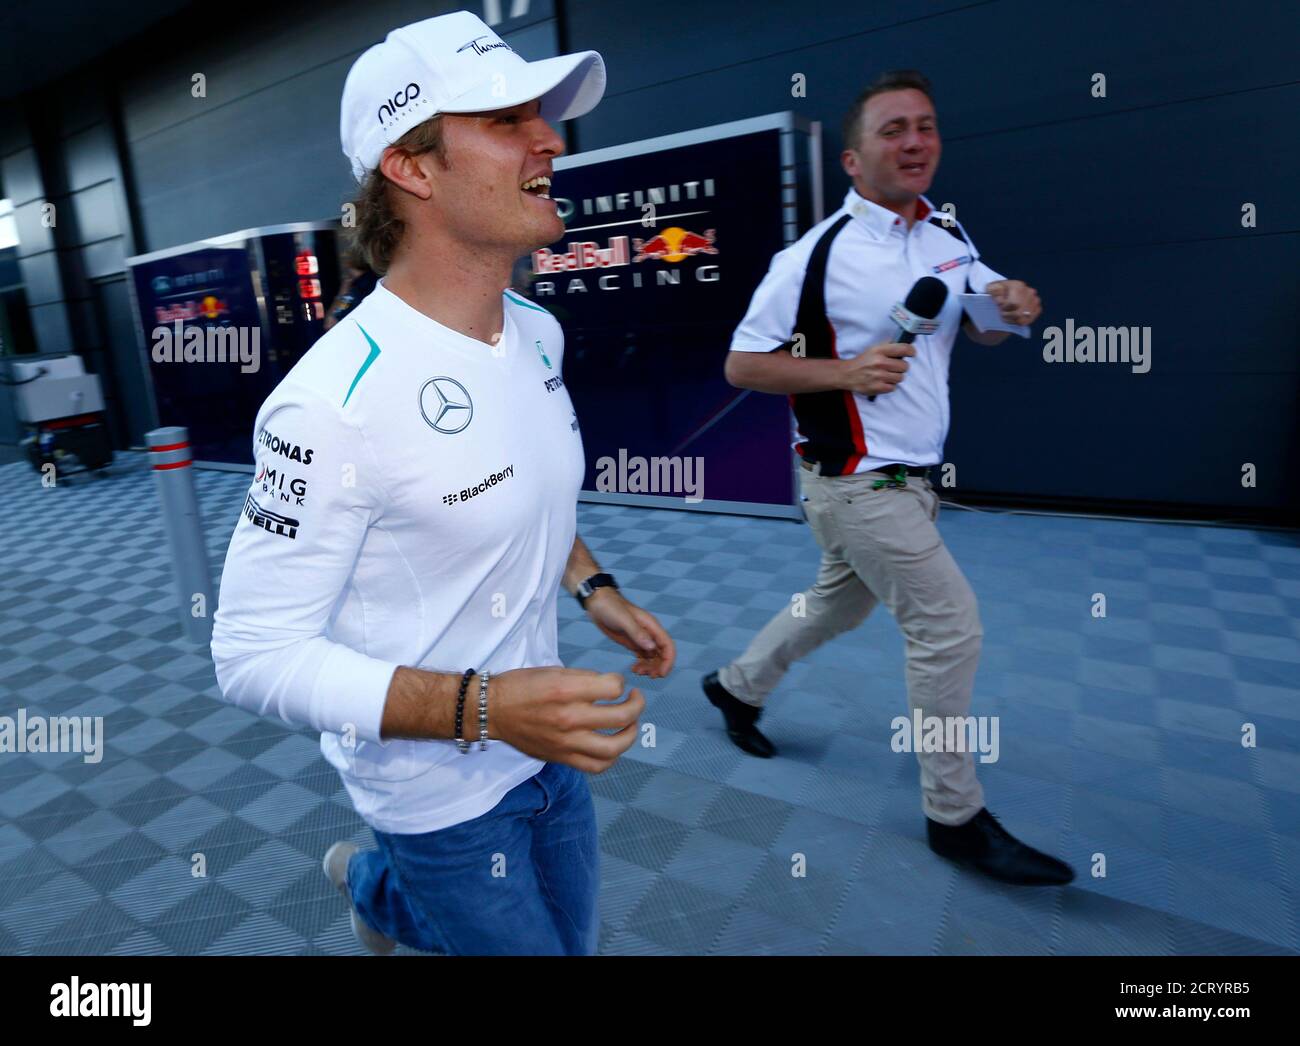 Mercedes Formula One driver Nico Rosberg of Germany runs from members of the media after appearing before race stewards after the British Grand Prix at the Silverstone Race circuit, central England, June 30, 2013. Rosberg was summoned to the stewards on Sunday for the Mercedes driver's apparent failure to slow for yellow warning flags during the race.  REUTERS/Darren Staples   (BRITAIN - Tags: SPORT MOTORSPORT F1) Stock Photo